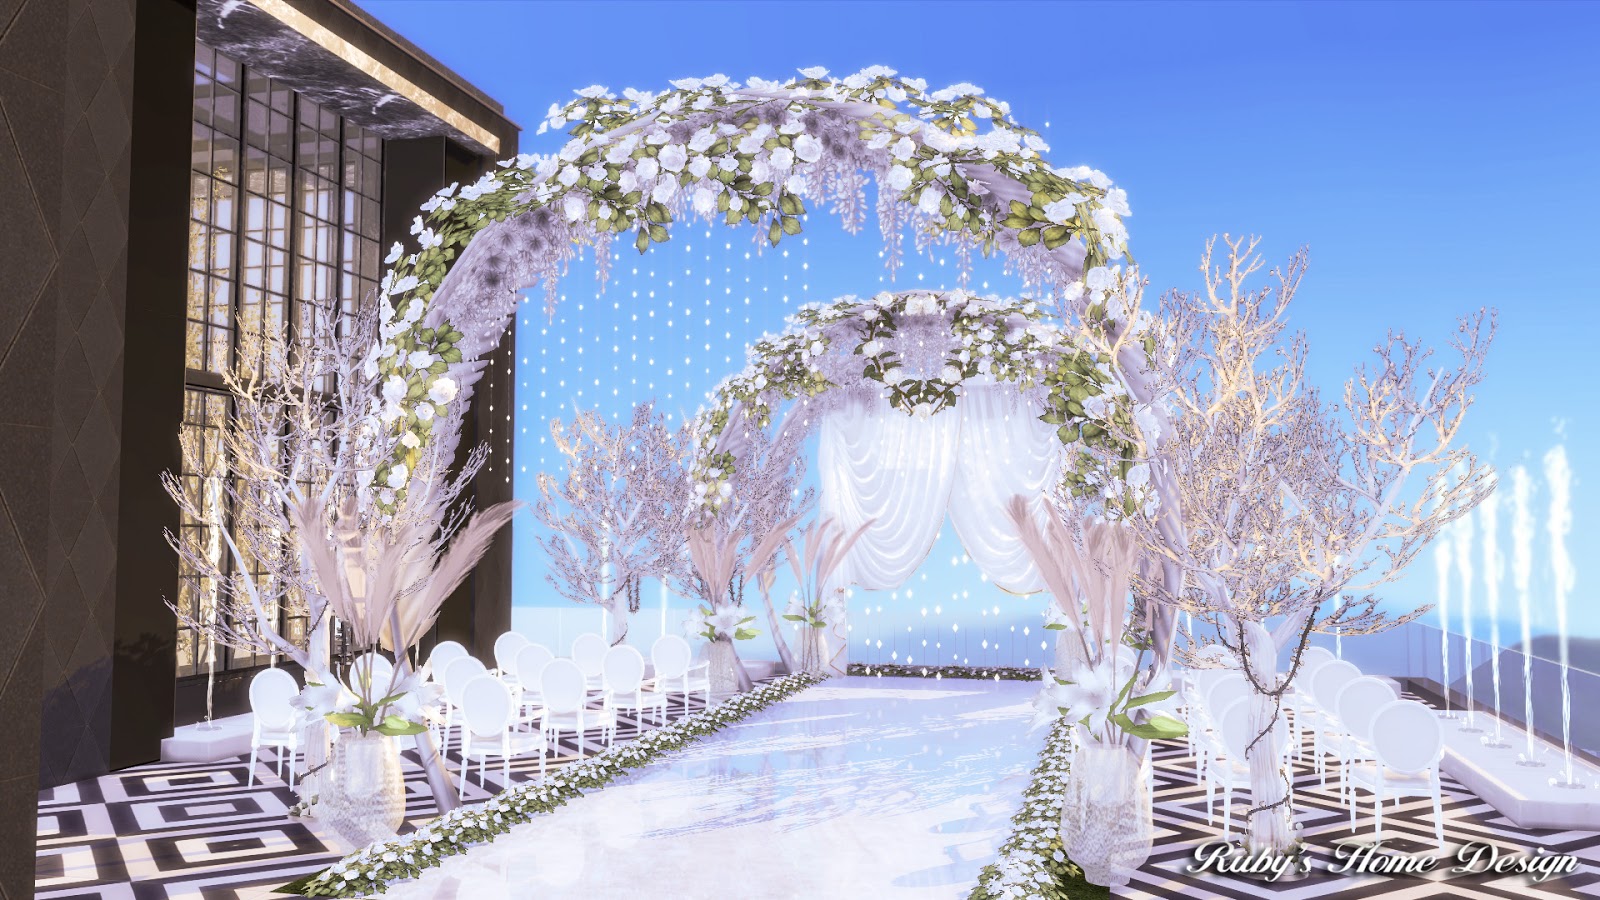 May 2nd Building: Sims 4 Love on a rooftop Wedding Venue 屋頂上的婚禮 (Free